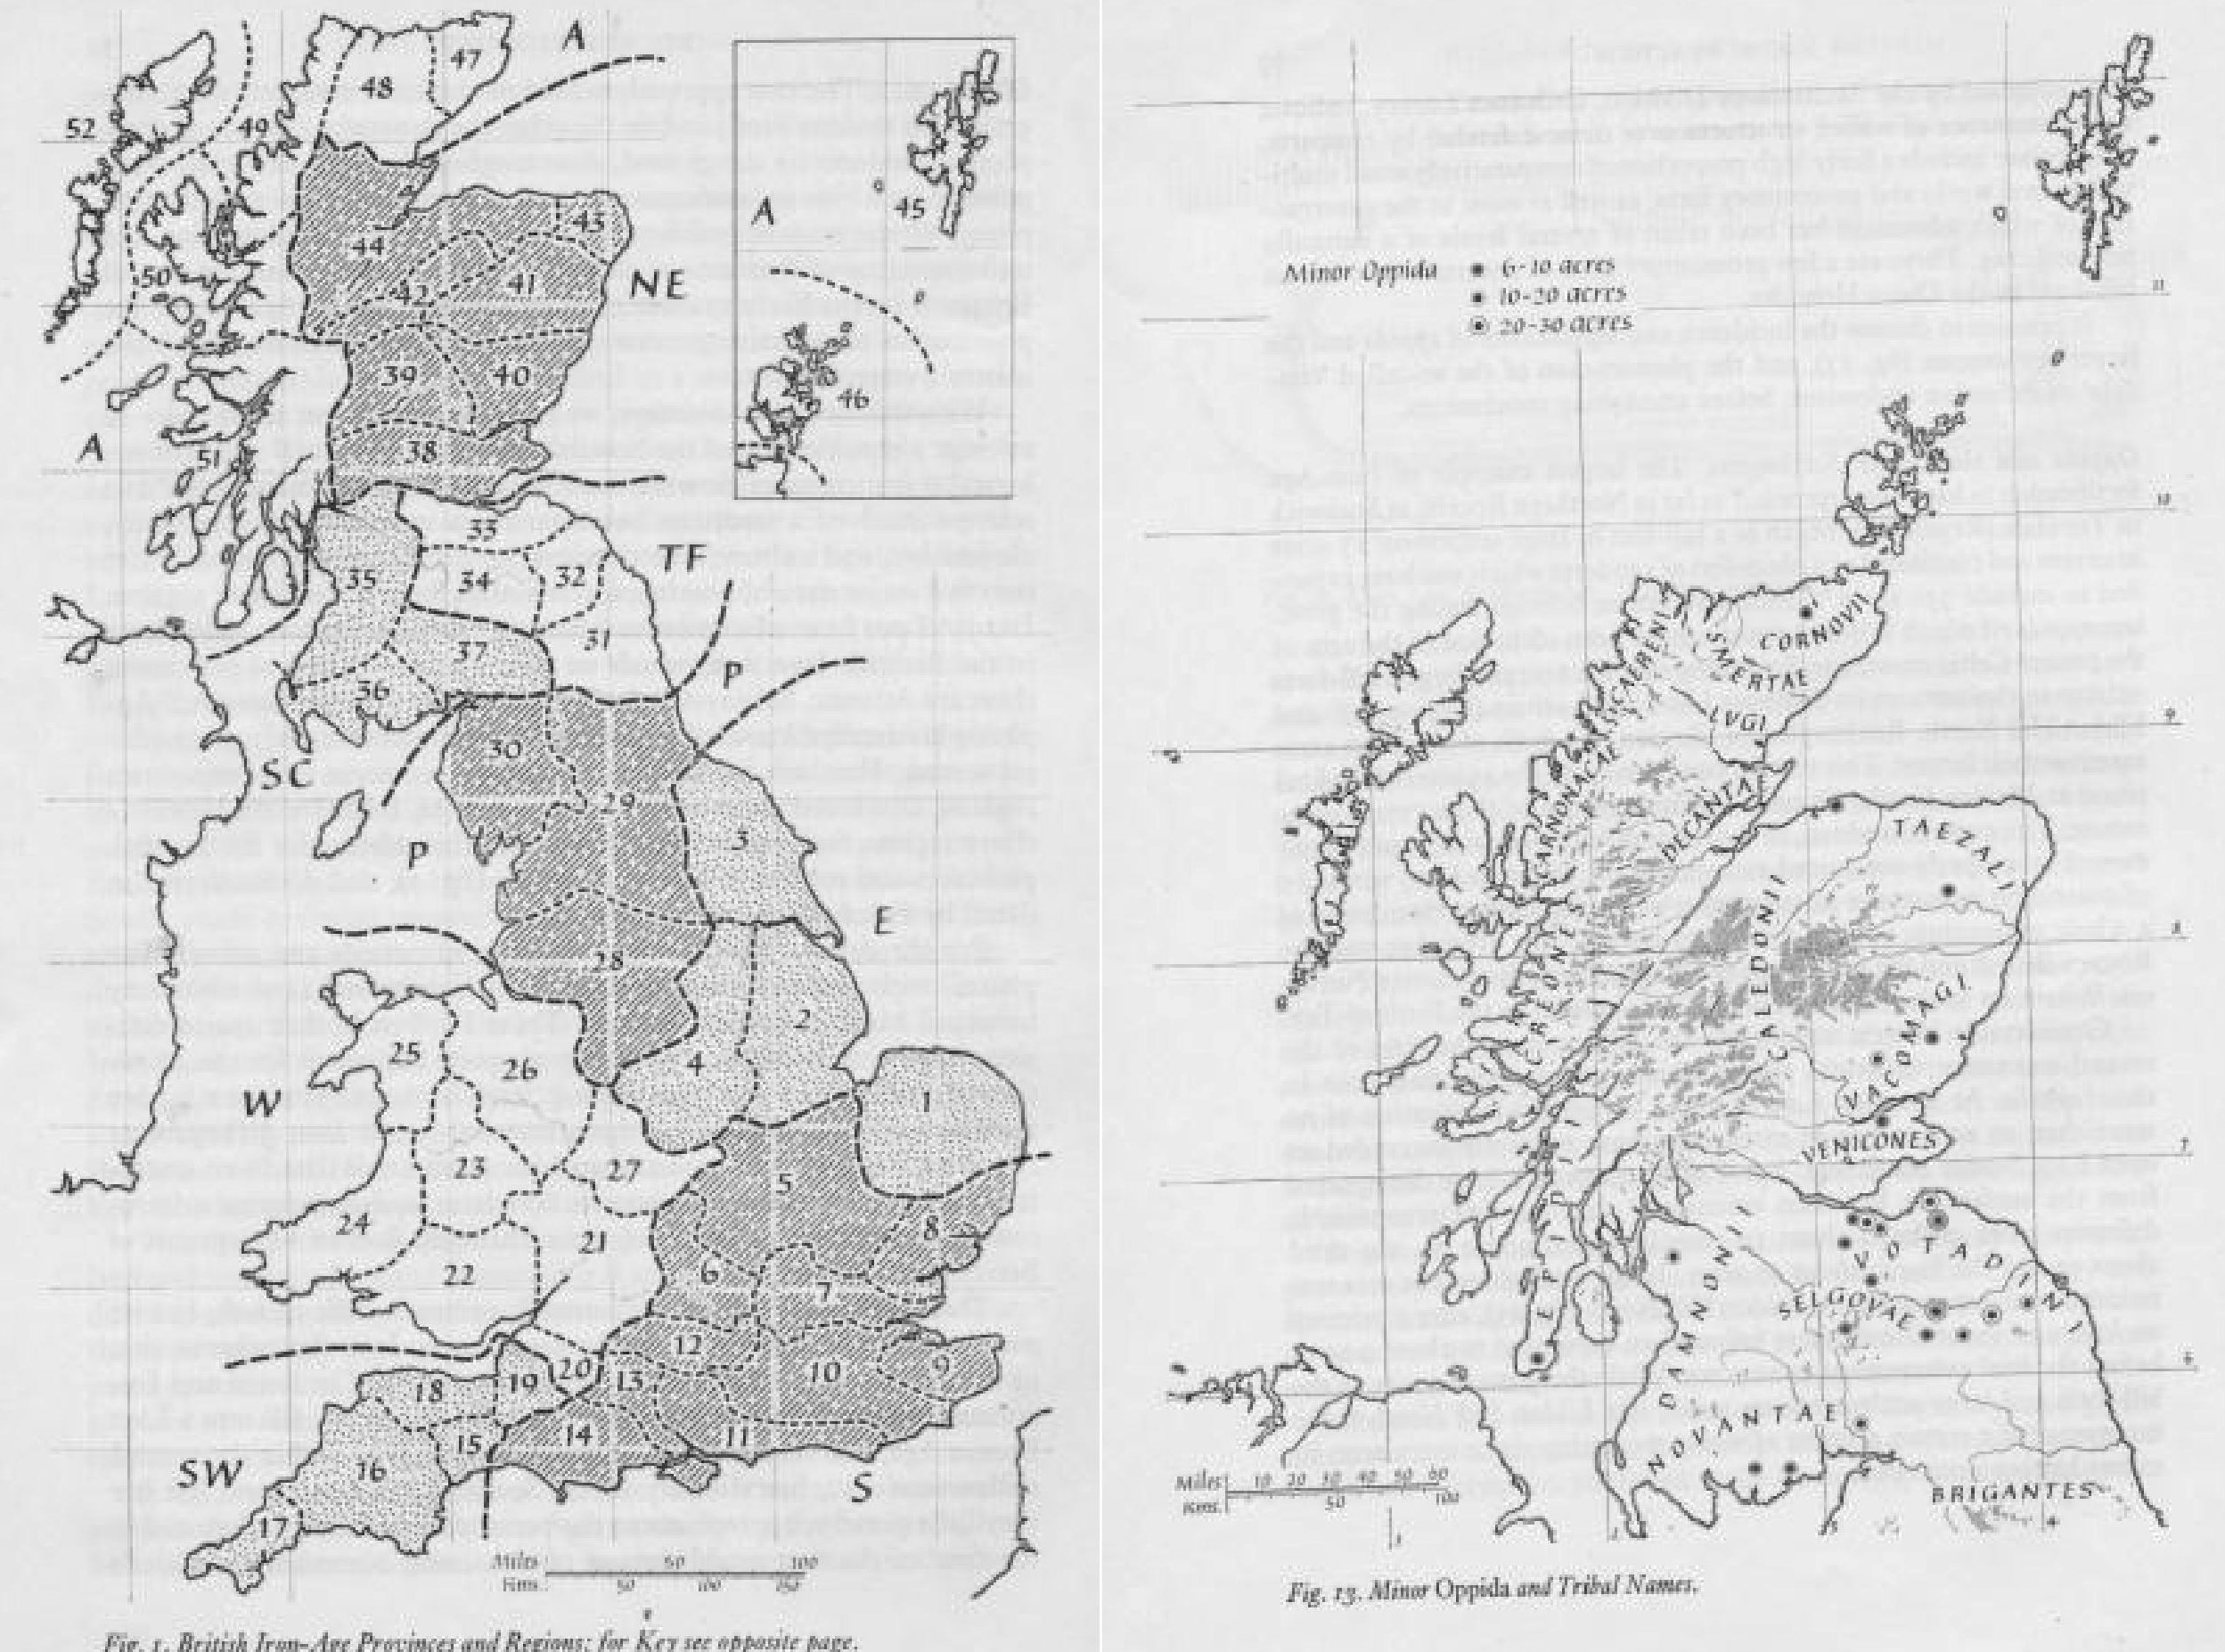 A composite image showing two maps. The map on the left shows Britain as 52 numbered regions and the map on the right shows Scotland with areas labelled with tribal names